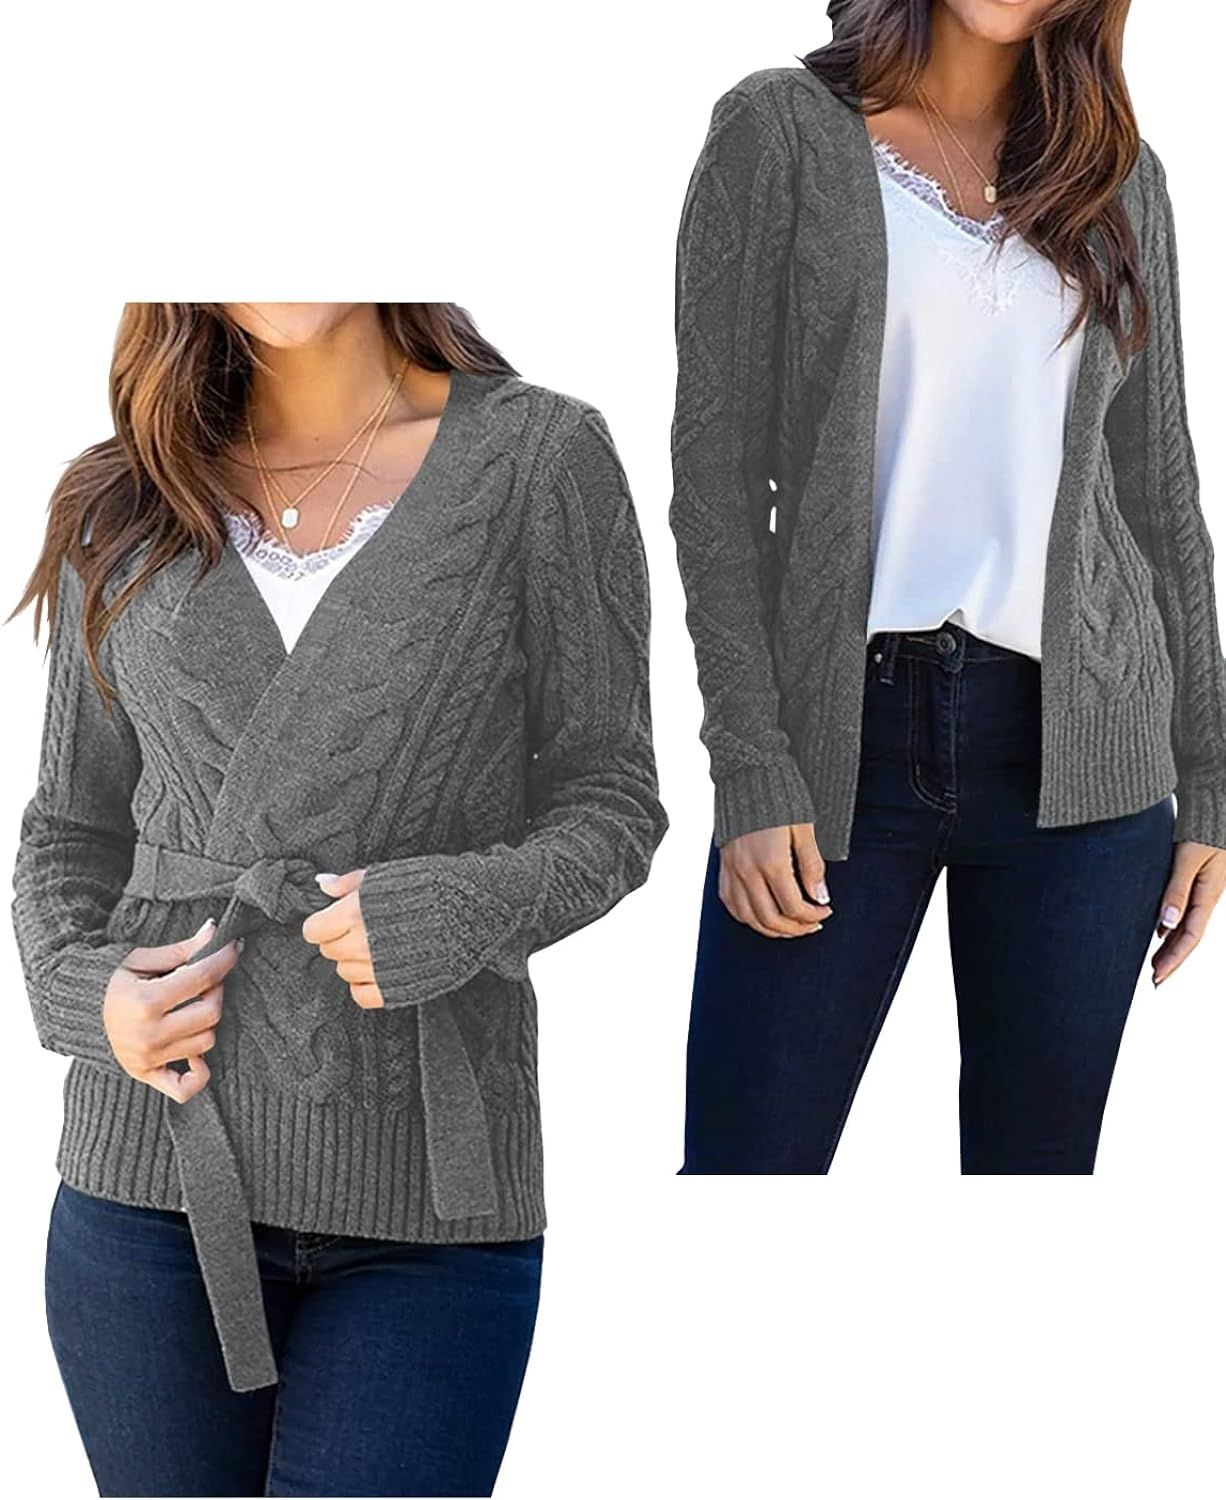 Veatzaer Women's Long Sleeve Belted Cable Slim Knit Sweater Open Front Cardigan Coat | Amazon (US)